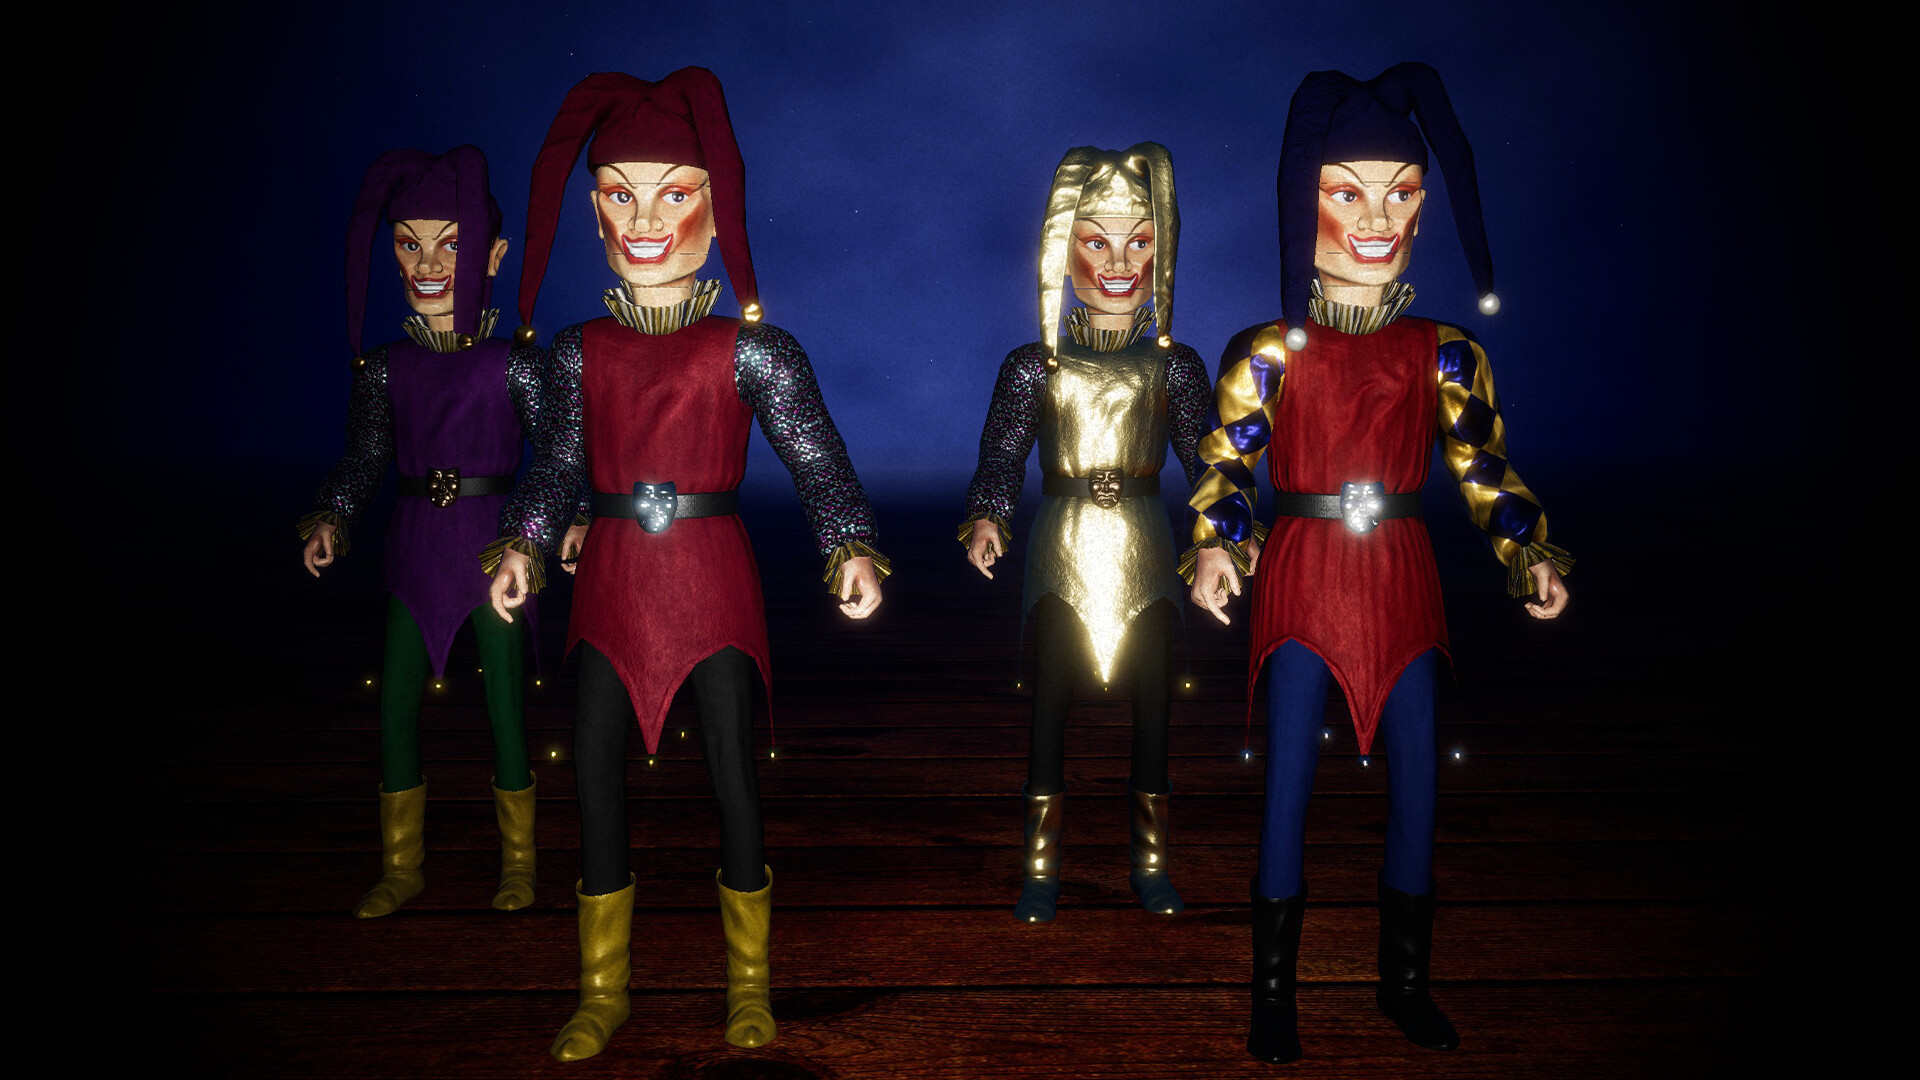 Puppet Master: The Game - Full Moon Toys  - Torch and Jester Skins Featured Screenshot #1